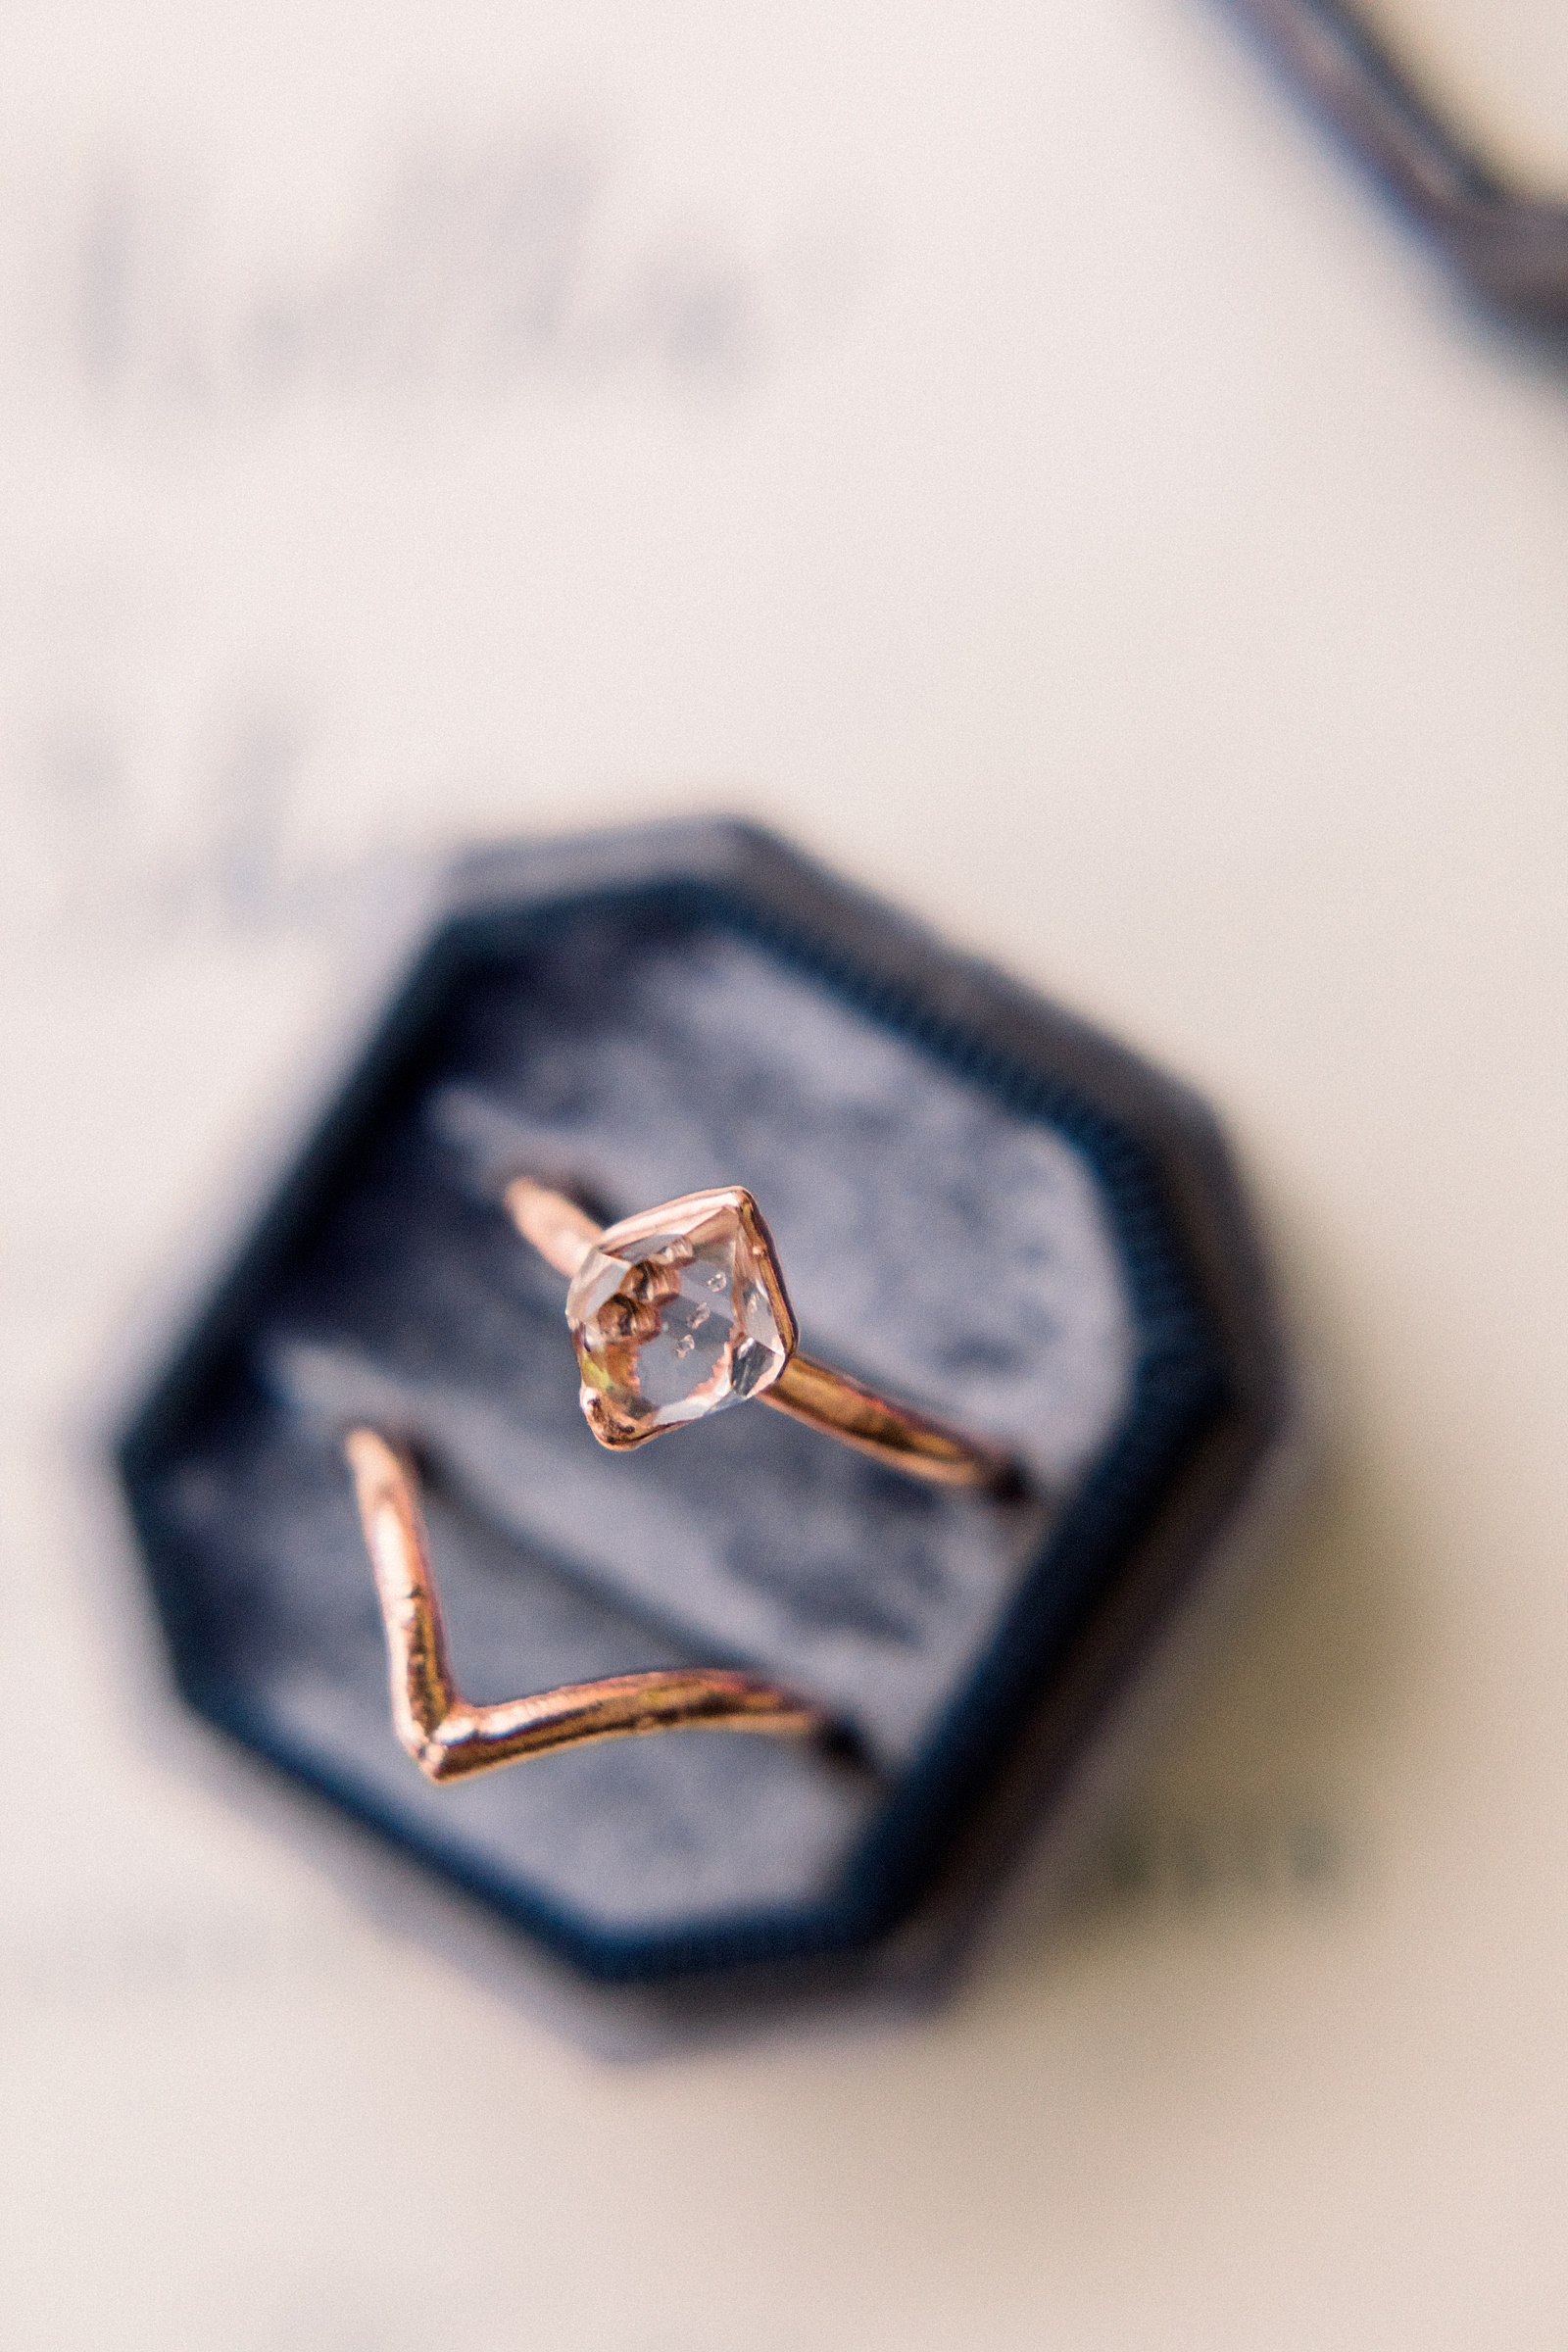 Unique Engagement Rings, Navy Velvet Box, Anna Kay Photography